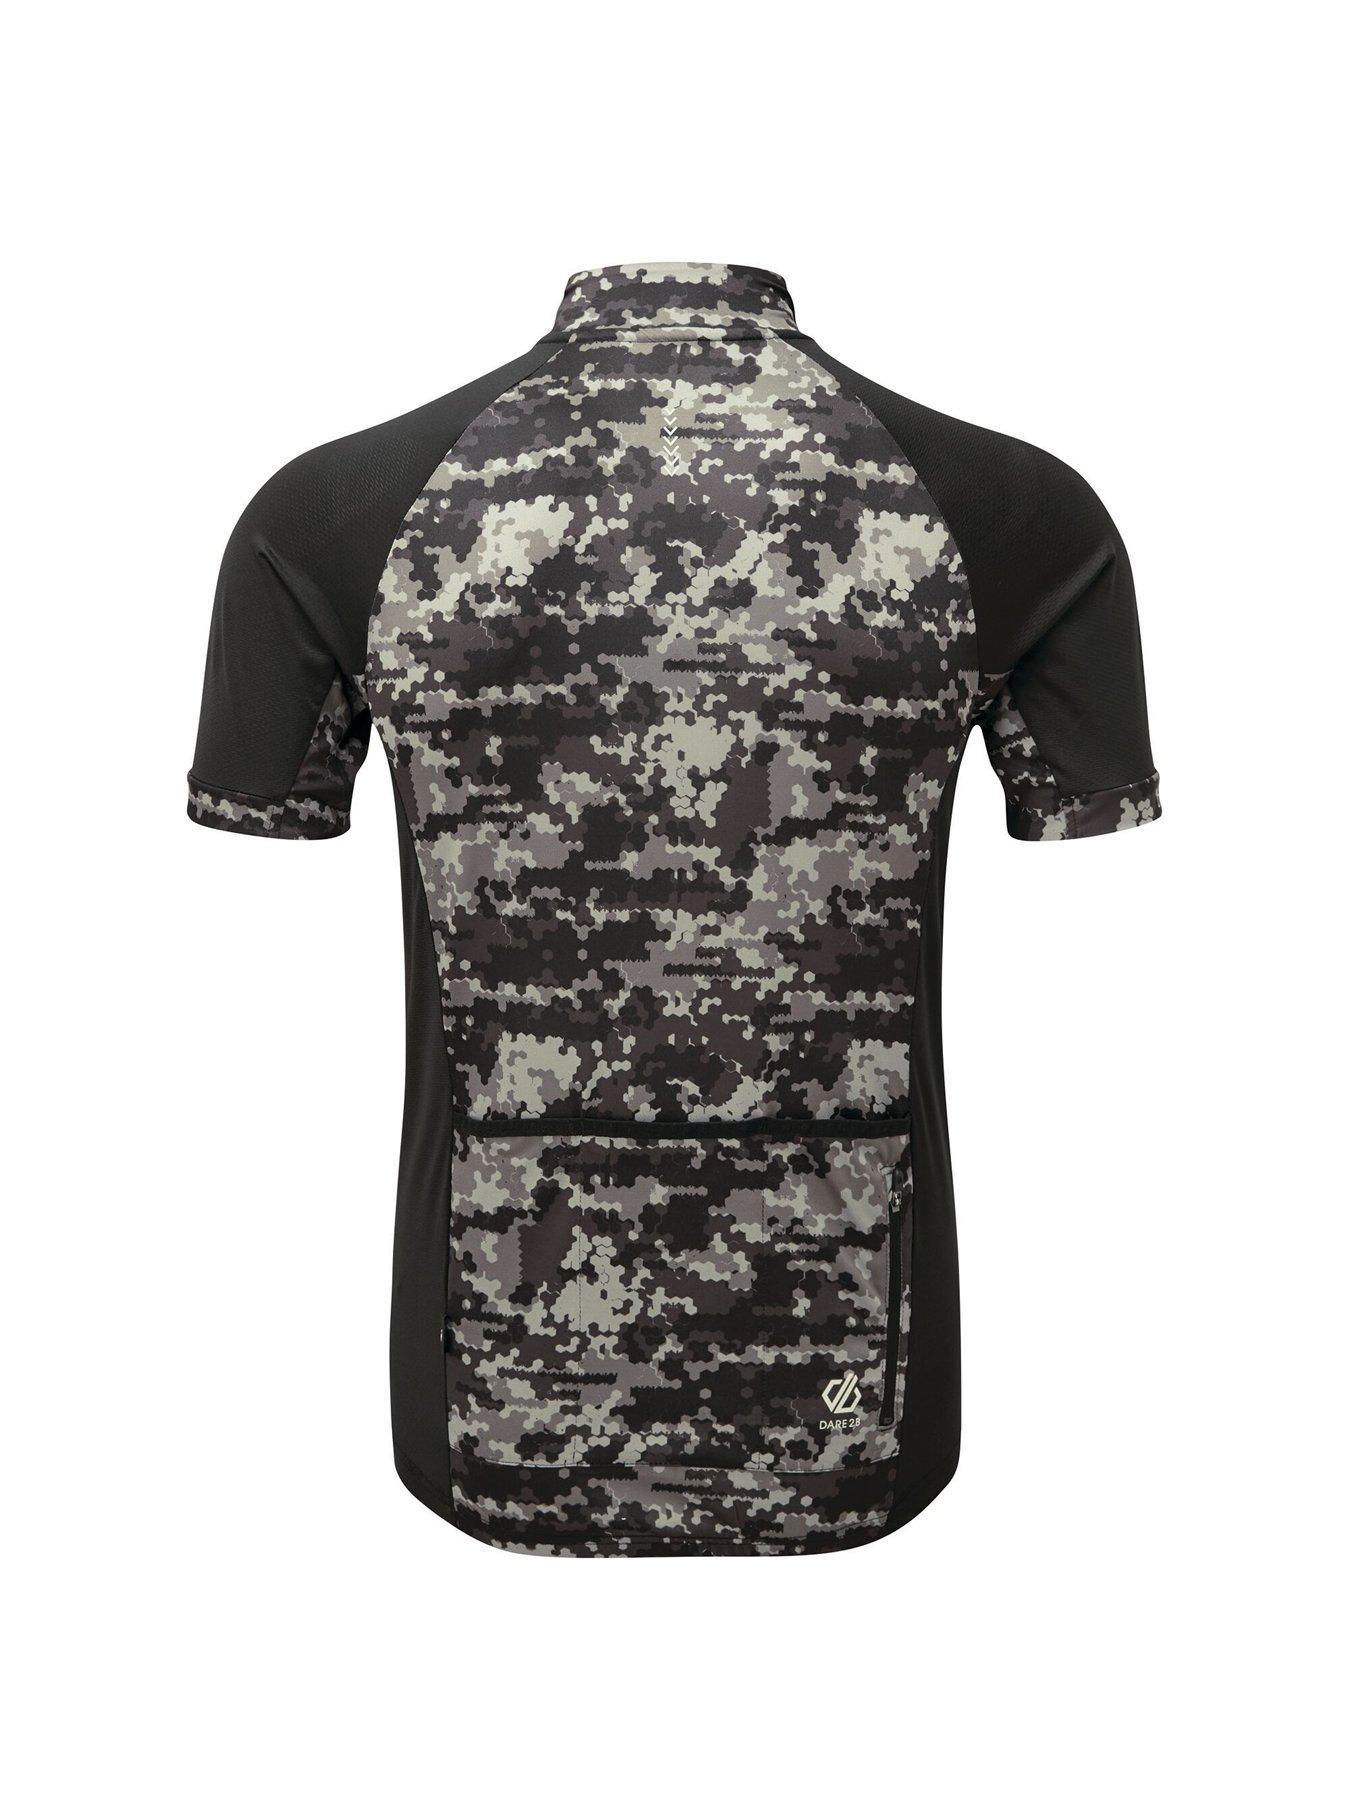  STAY THE COURSE BLACK MENS JERSEY